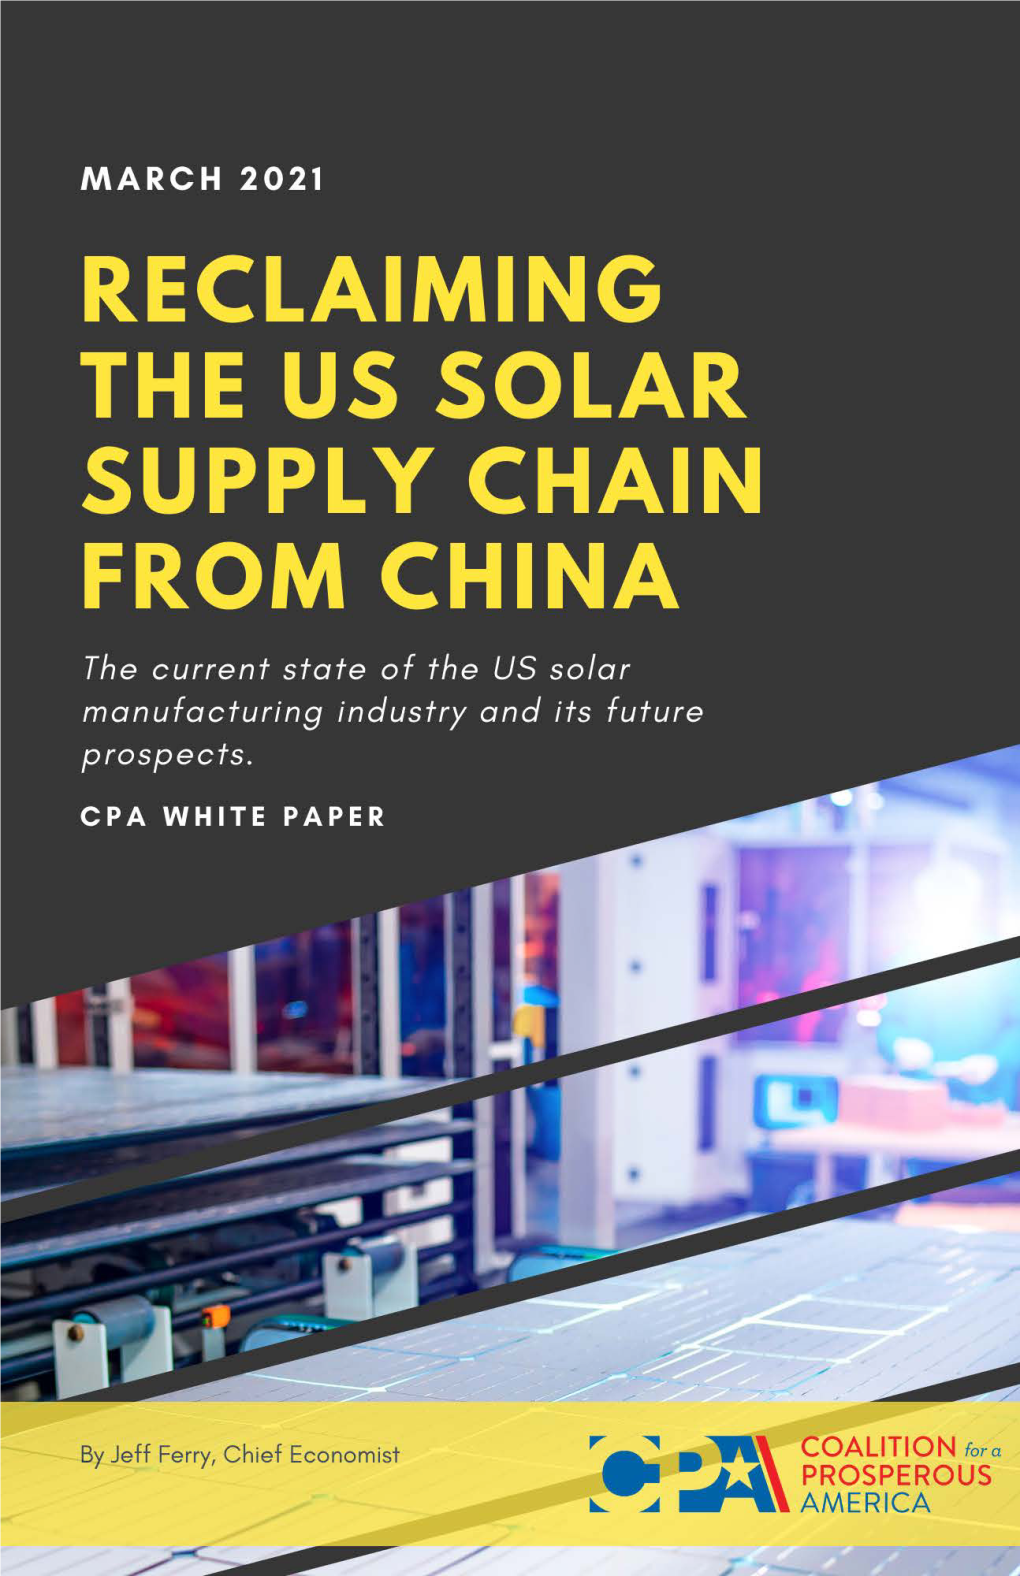 Reclaiming the US Solar Supply Chain from China by Jeff Ferry, Chief Economist – Coalition for a Prosperous America